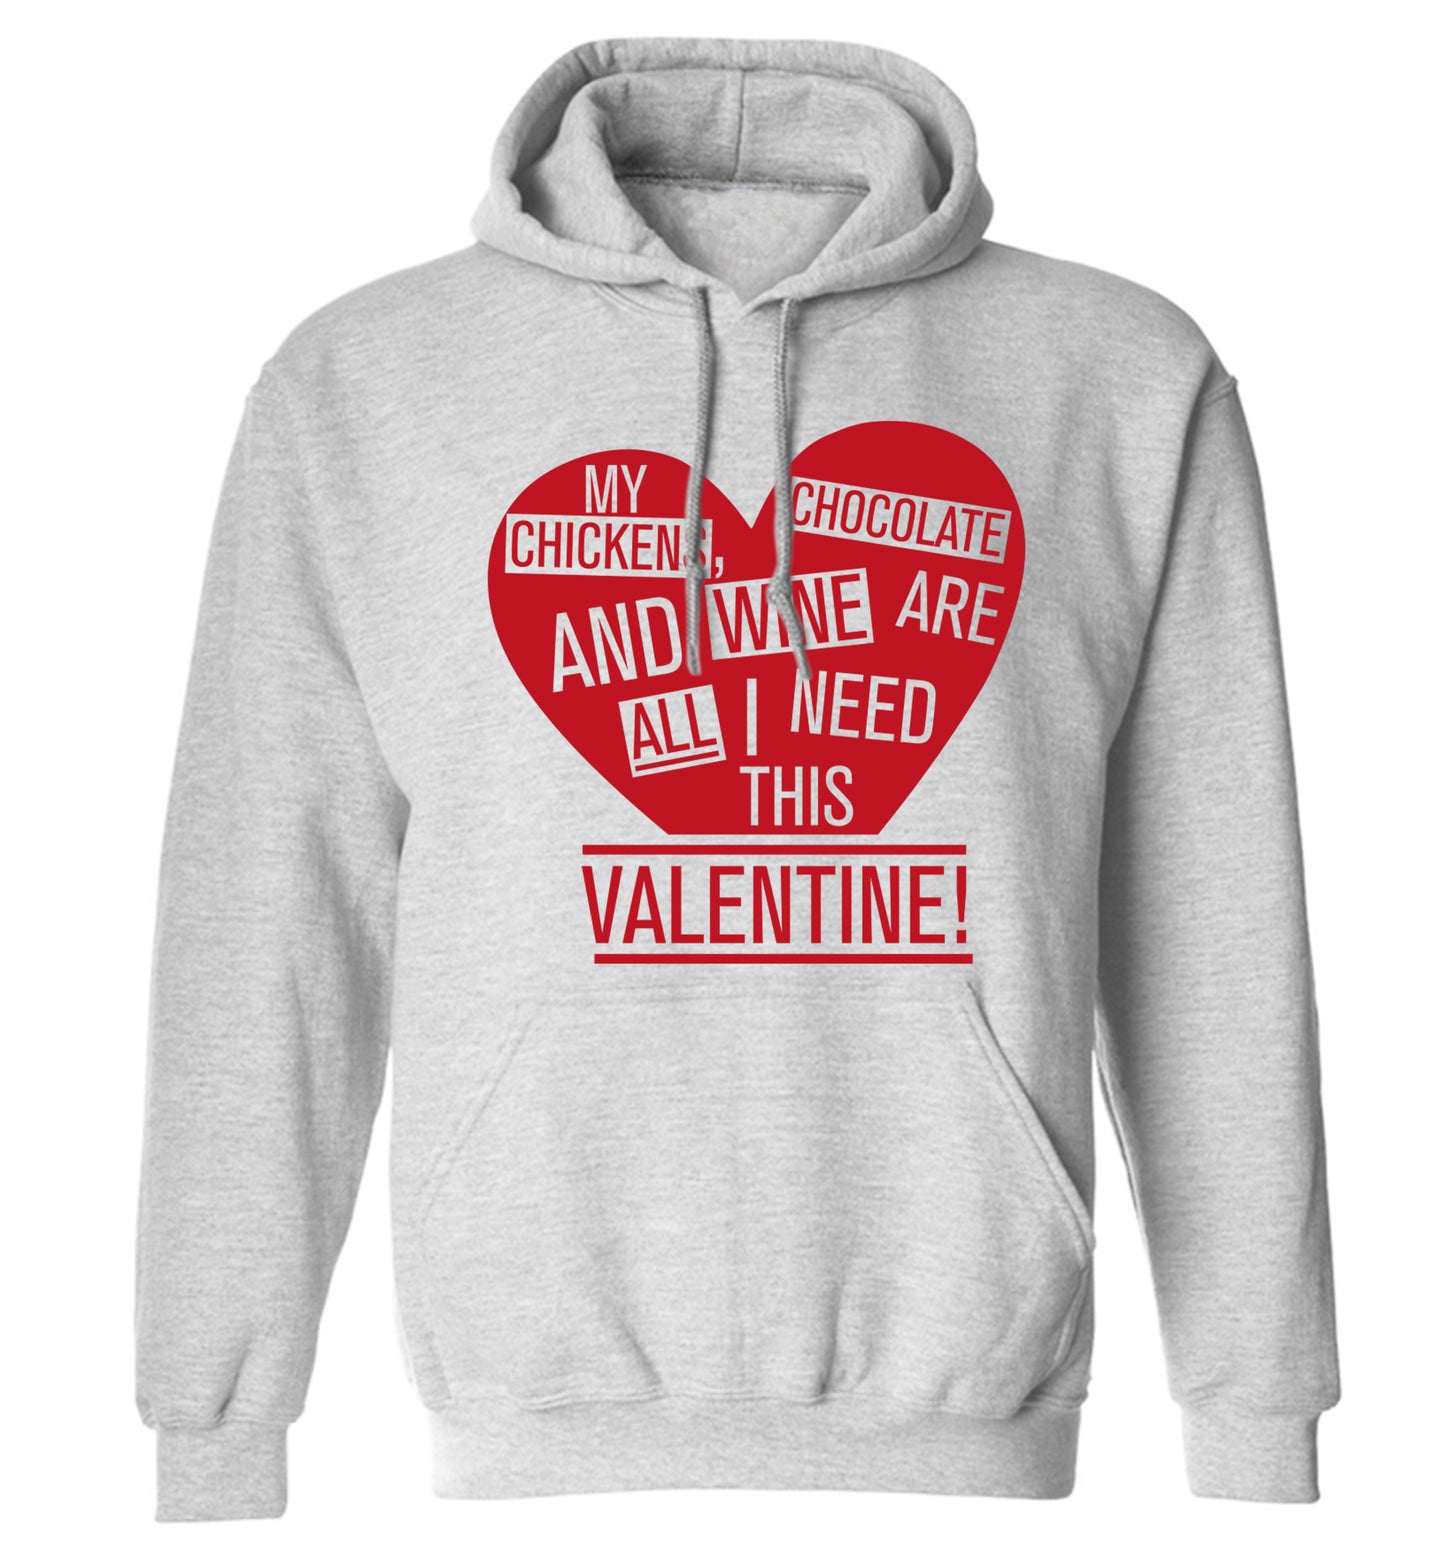 My chickens, chocolate and wine are all I need this valentine! adults unisex grey hoodie 2XL